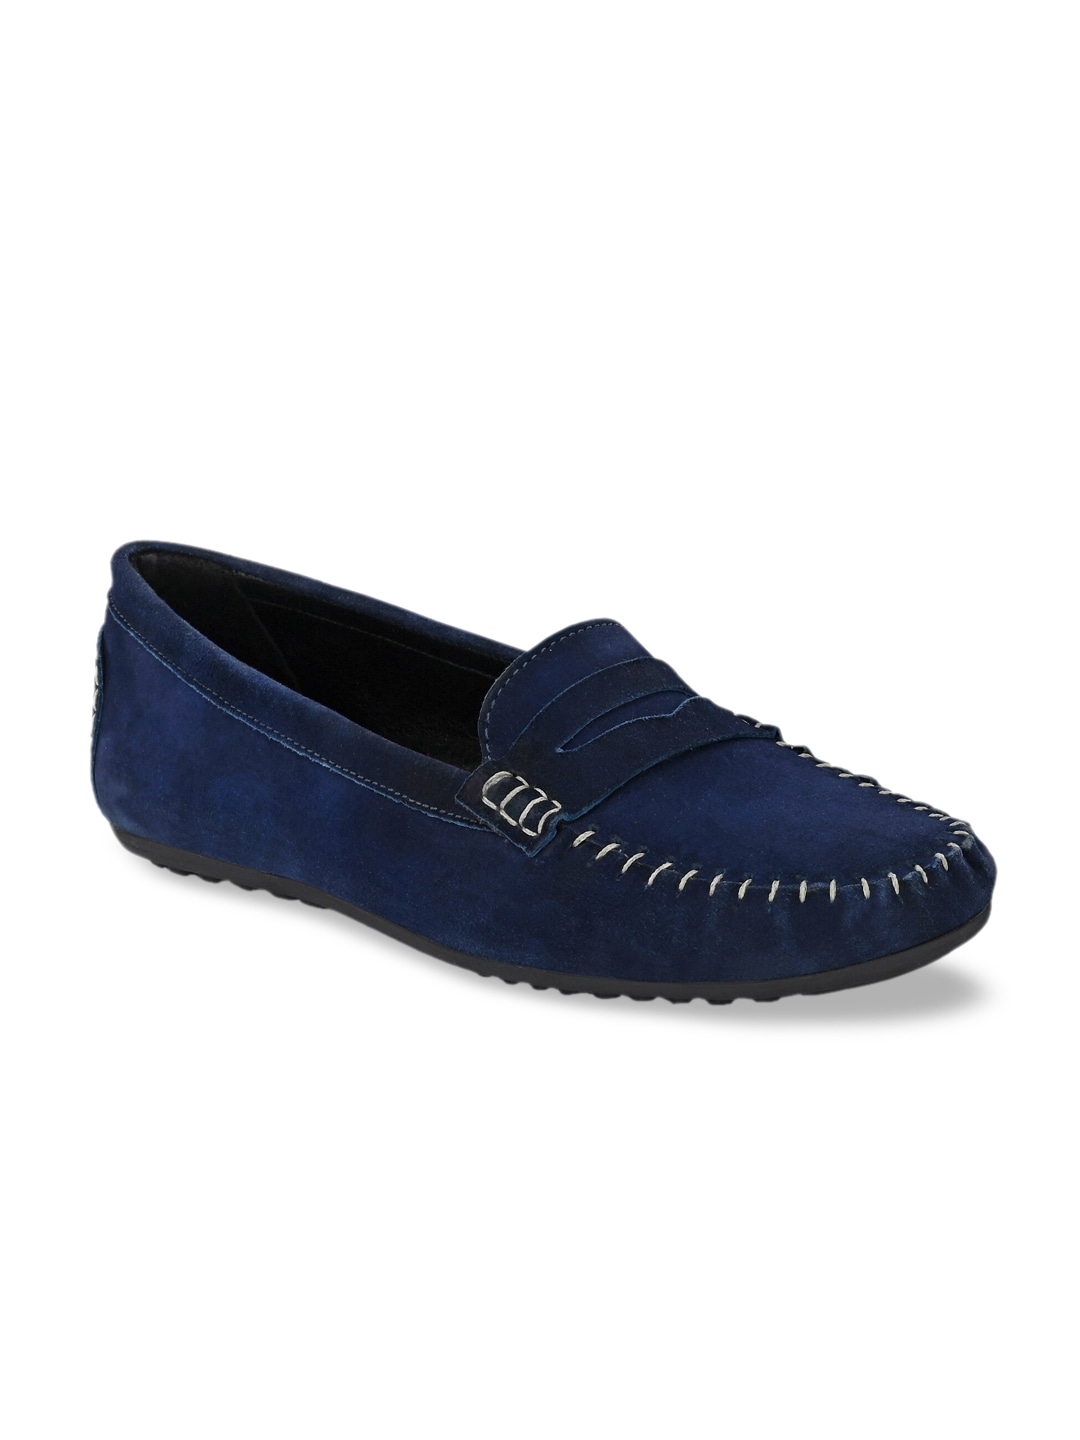 CARLO ROMANO Women Suede Penny Loafers Price in India